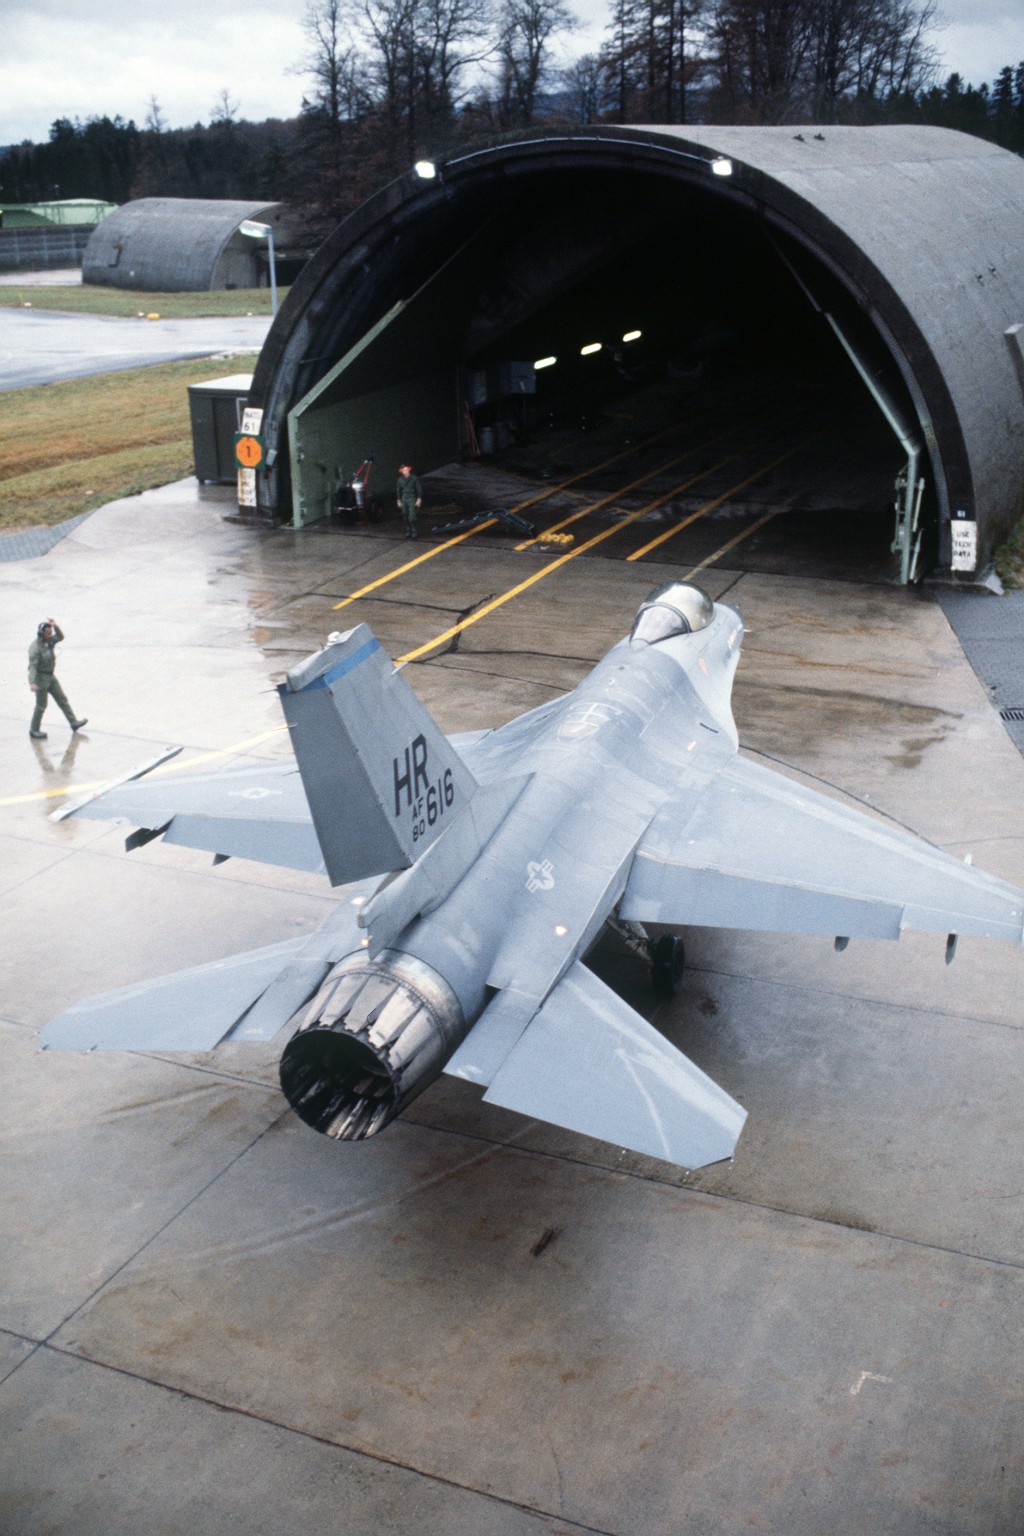 F-16A Fighting Falcon of the 50th Tactical Fighter Wing Hahn